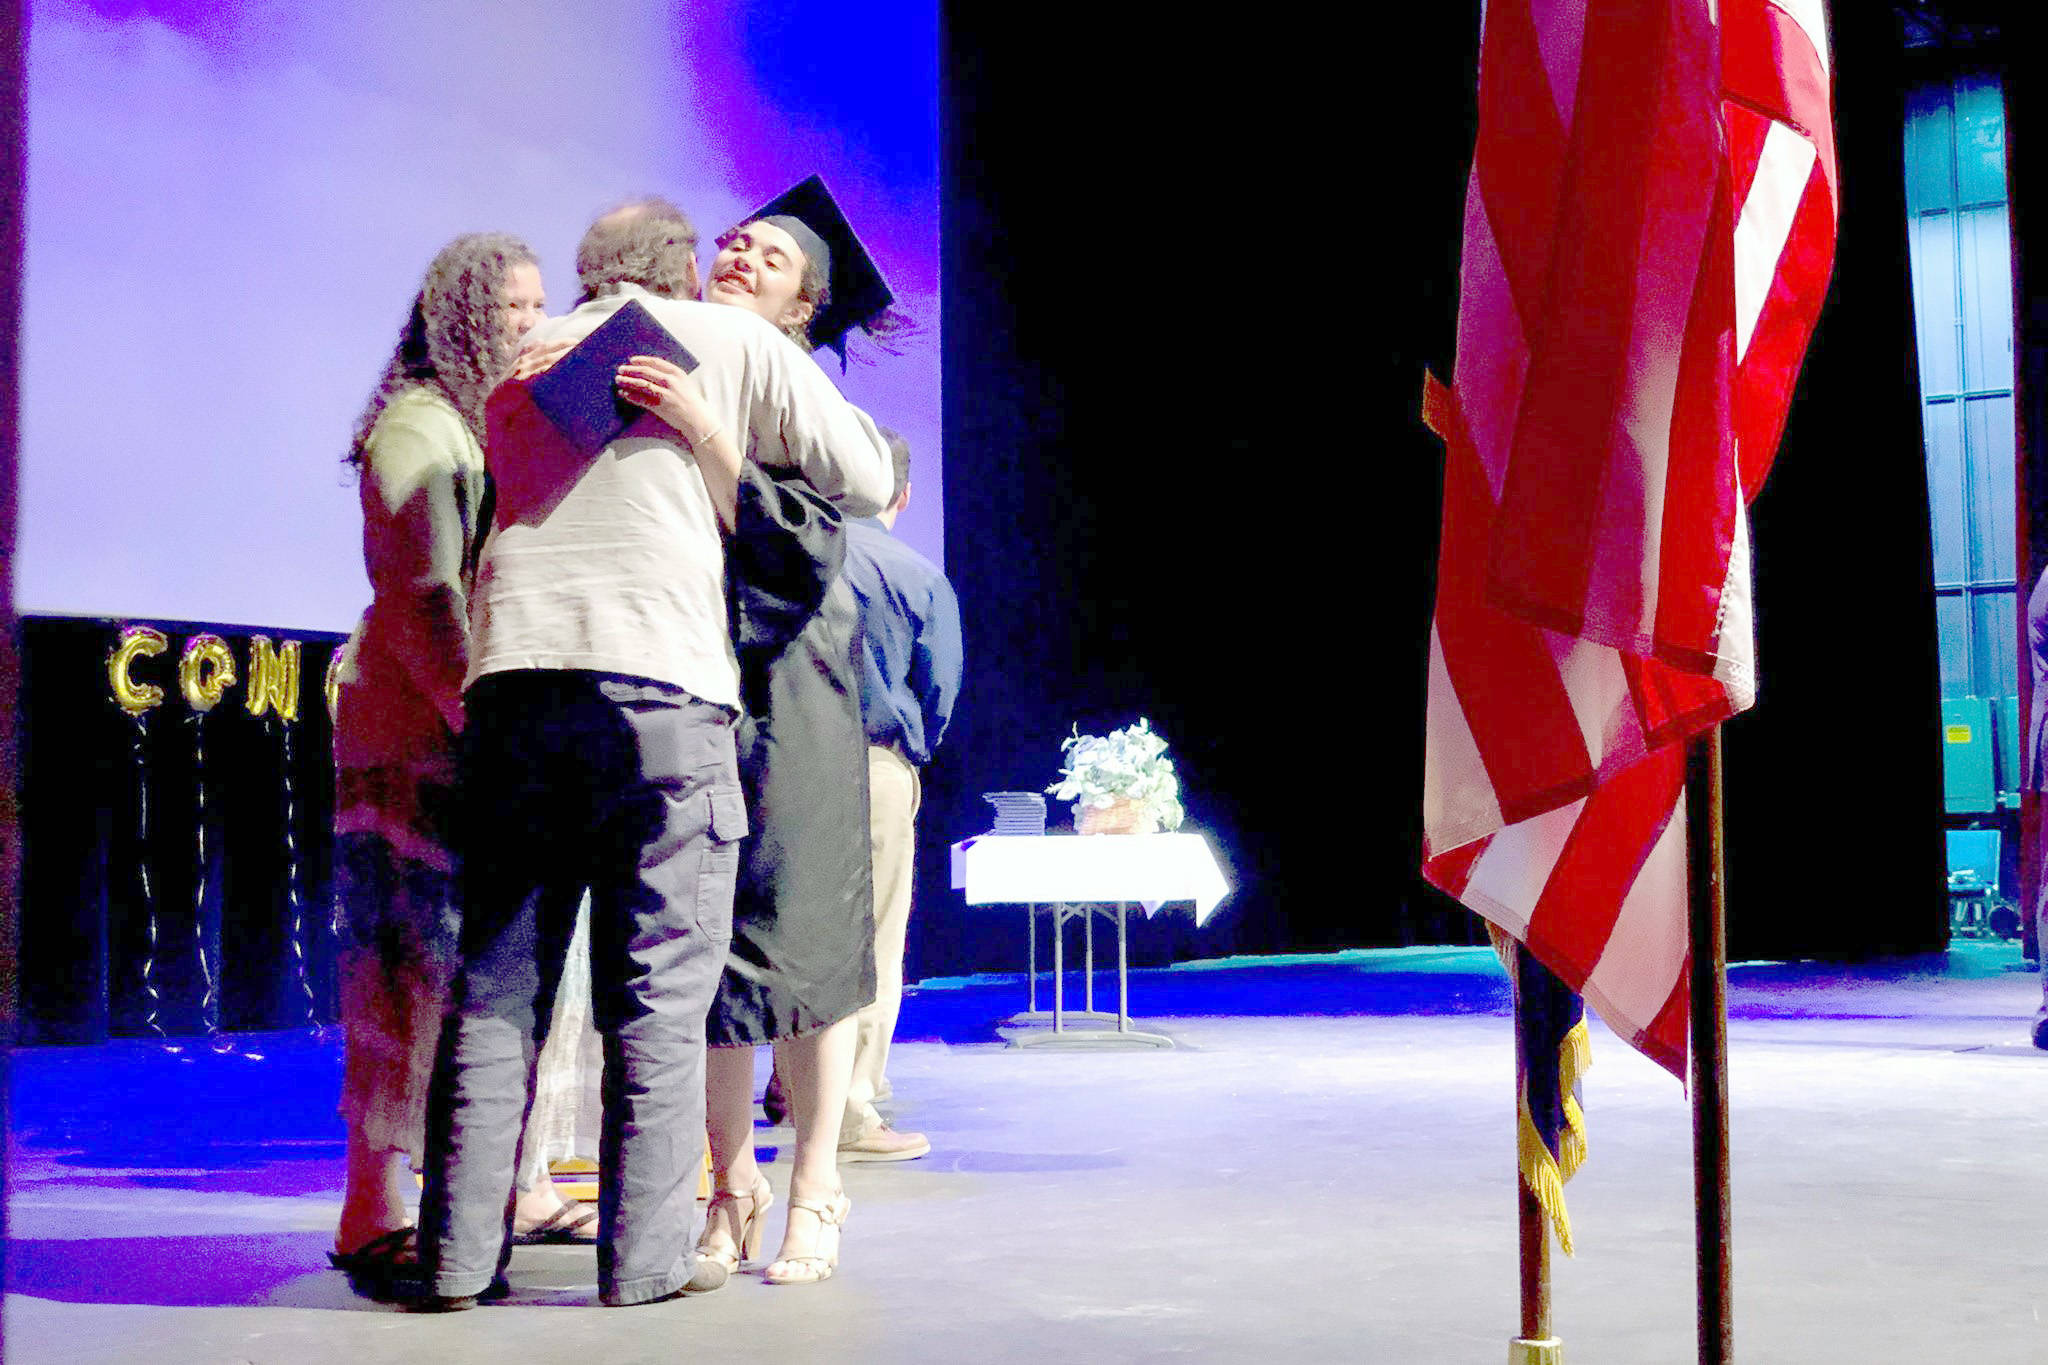 Graduate Emerald Miller receives her high school diploma from her parents at the Kenai Peninsula Borough School District Connections home-school program graduation ceremony, Thursday, May 23, 2019, in Soldotna, Alaska. (Photo by Victoria Petersen/Peninsula Clarion)